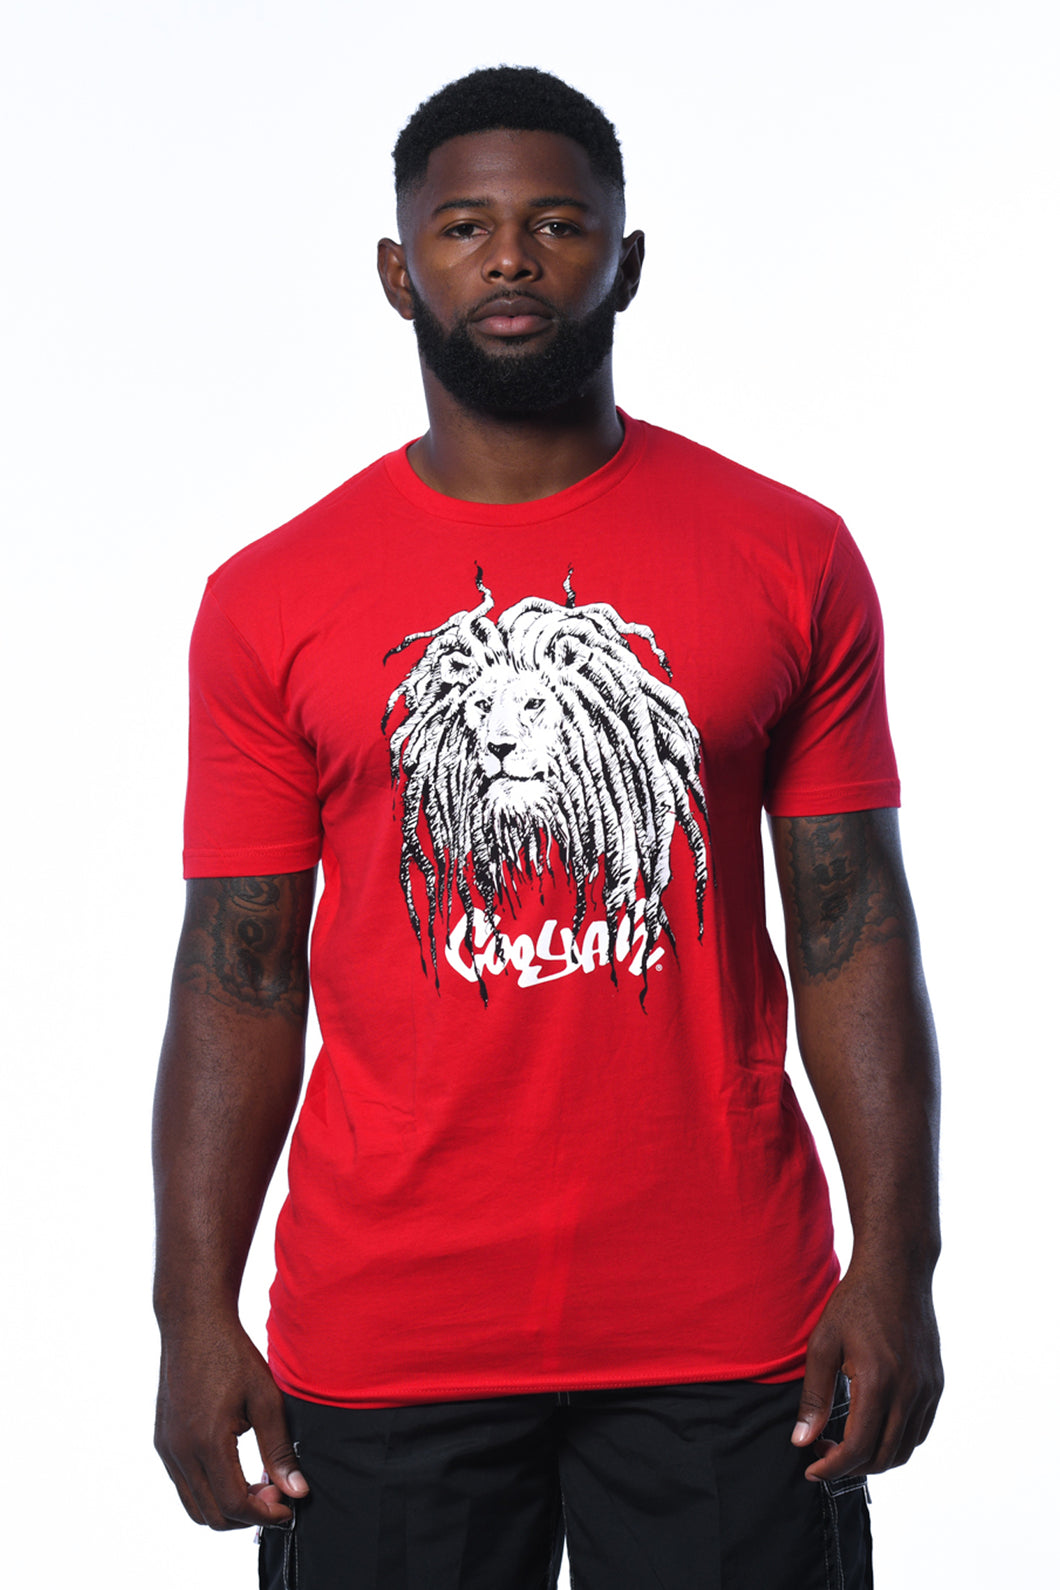 Cooyah Jamaica.  Men's Rasta Lion with Dreads graphic tee in red.  Jamaican  reggae clothing brand.